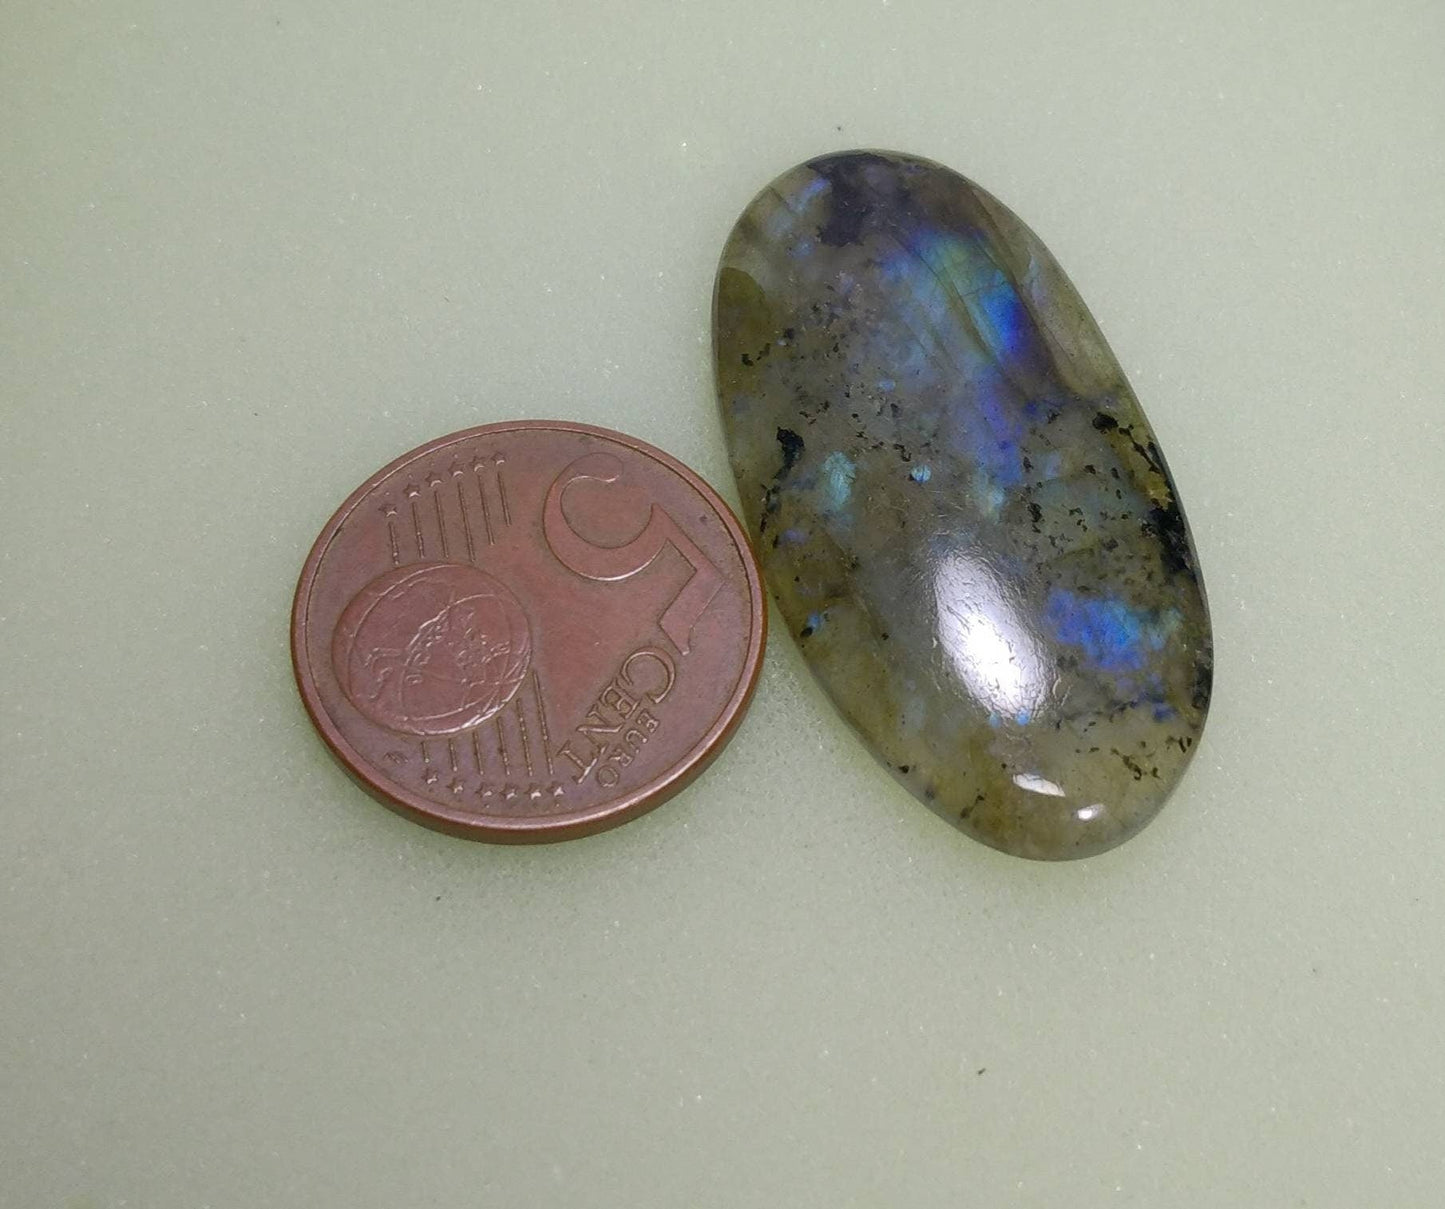 ARSAA GEMS AND MINERALSNatural fine quality beautiful 34 carats oval shape labradorite cabochon - Premium  from ARSAA GEMS AND MINERALS - Just $30.00! Shop now at ARSAA GEMS AND MINERALS